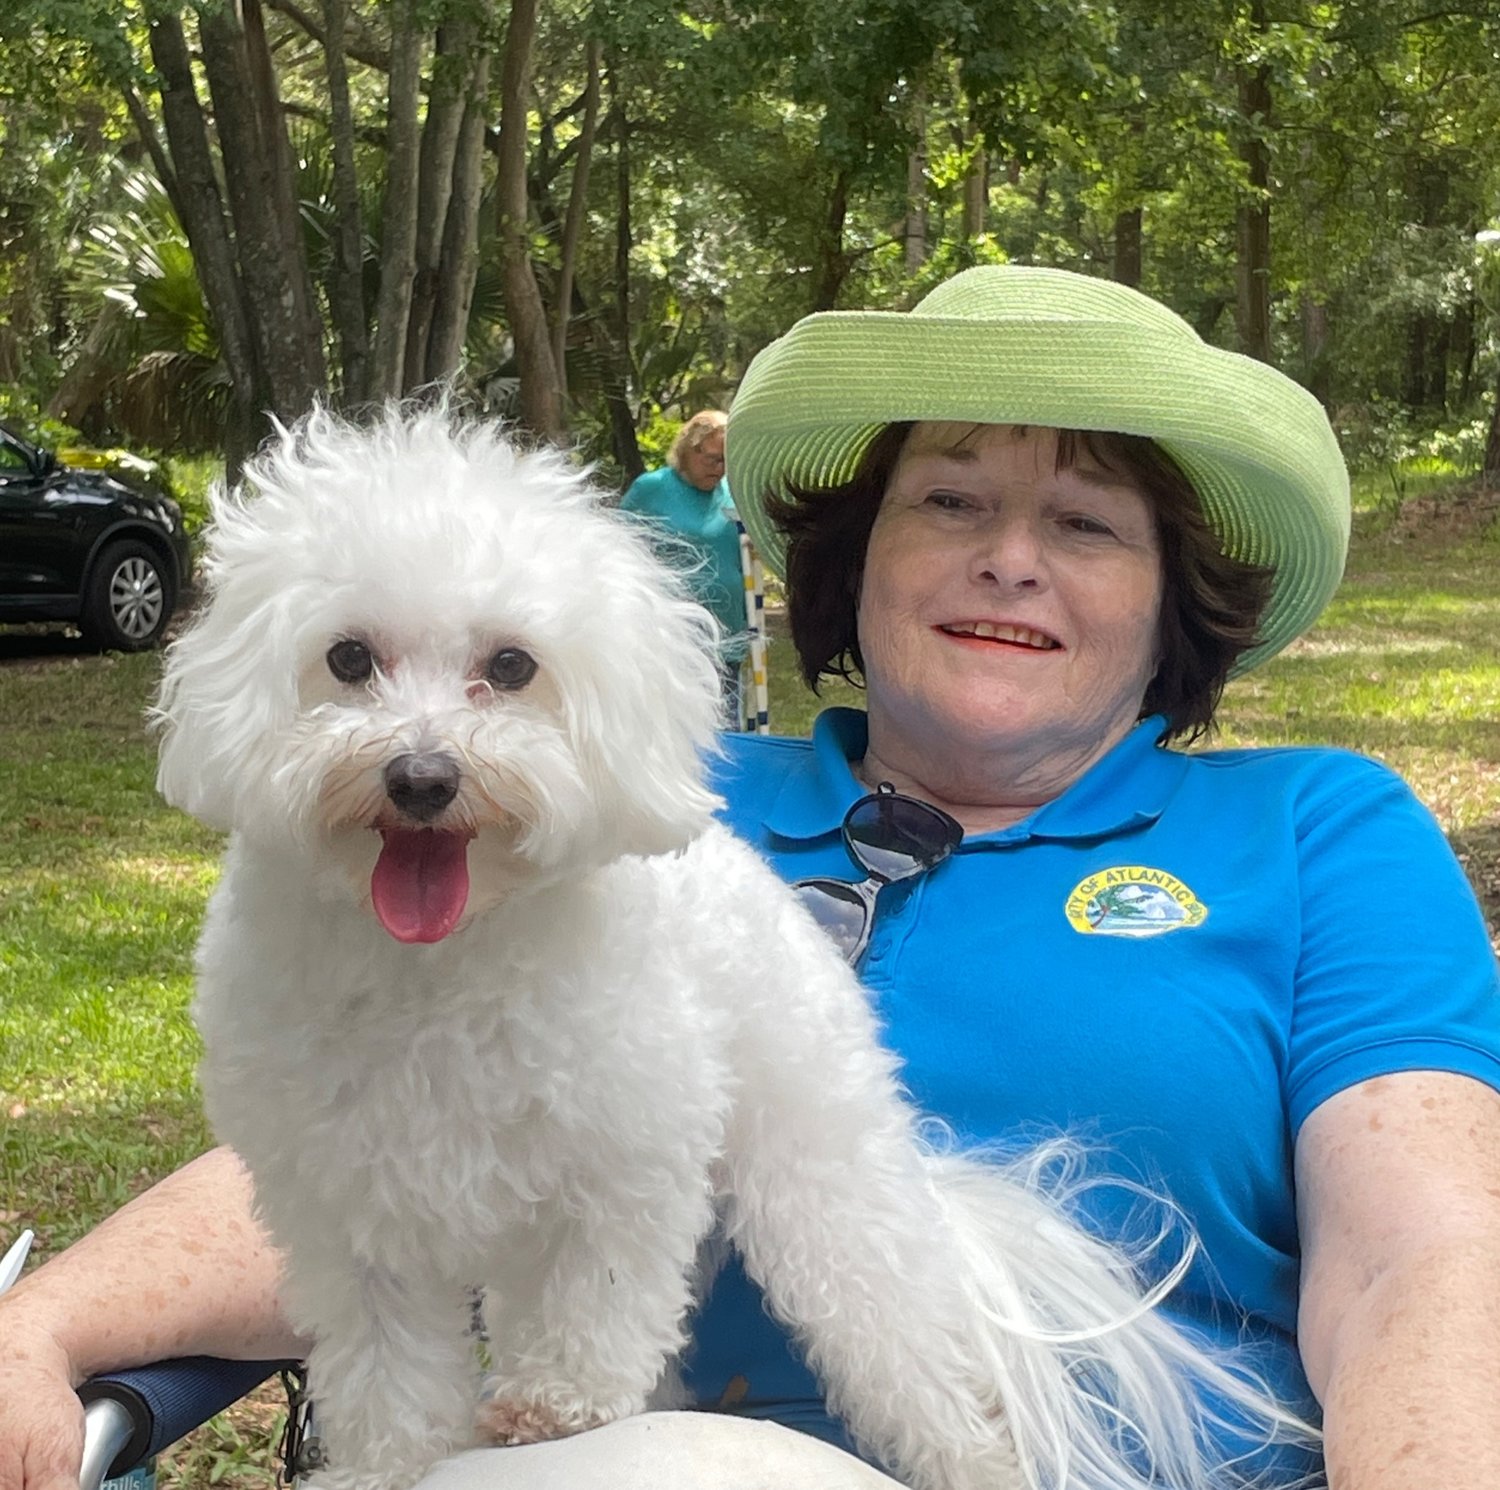 Atlantic Beach commissioner Candace Kelly with her dog, George.